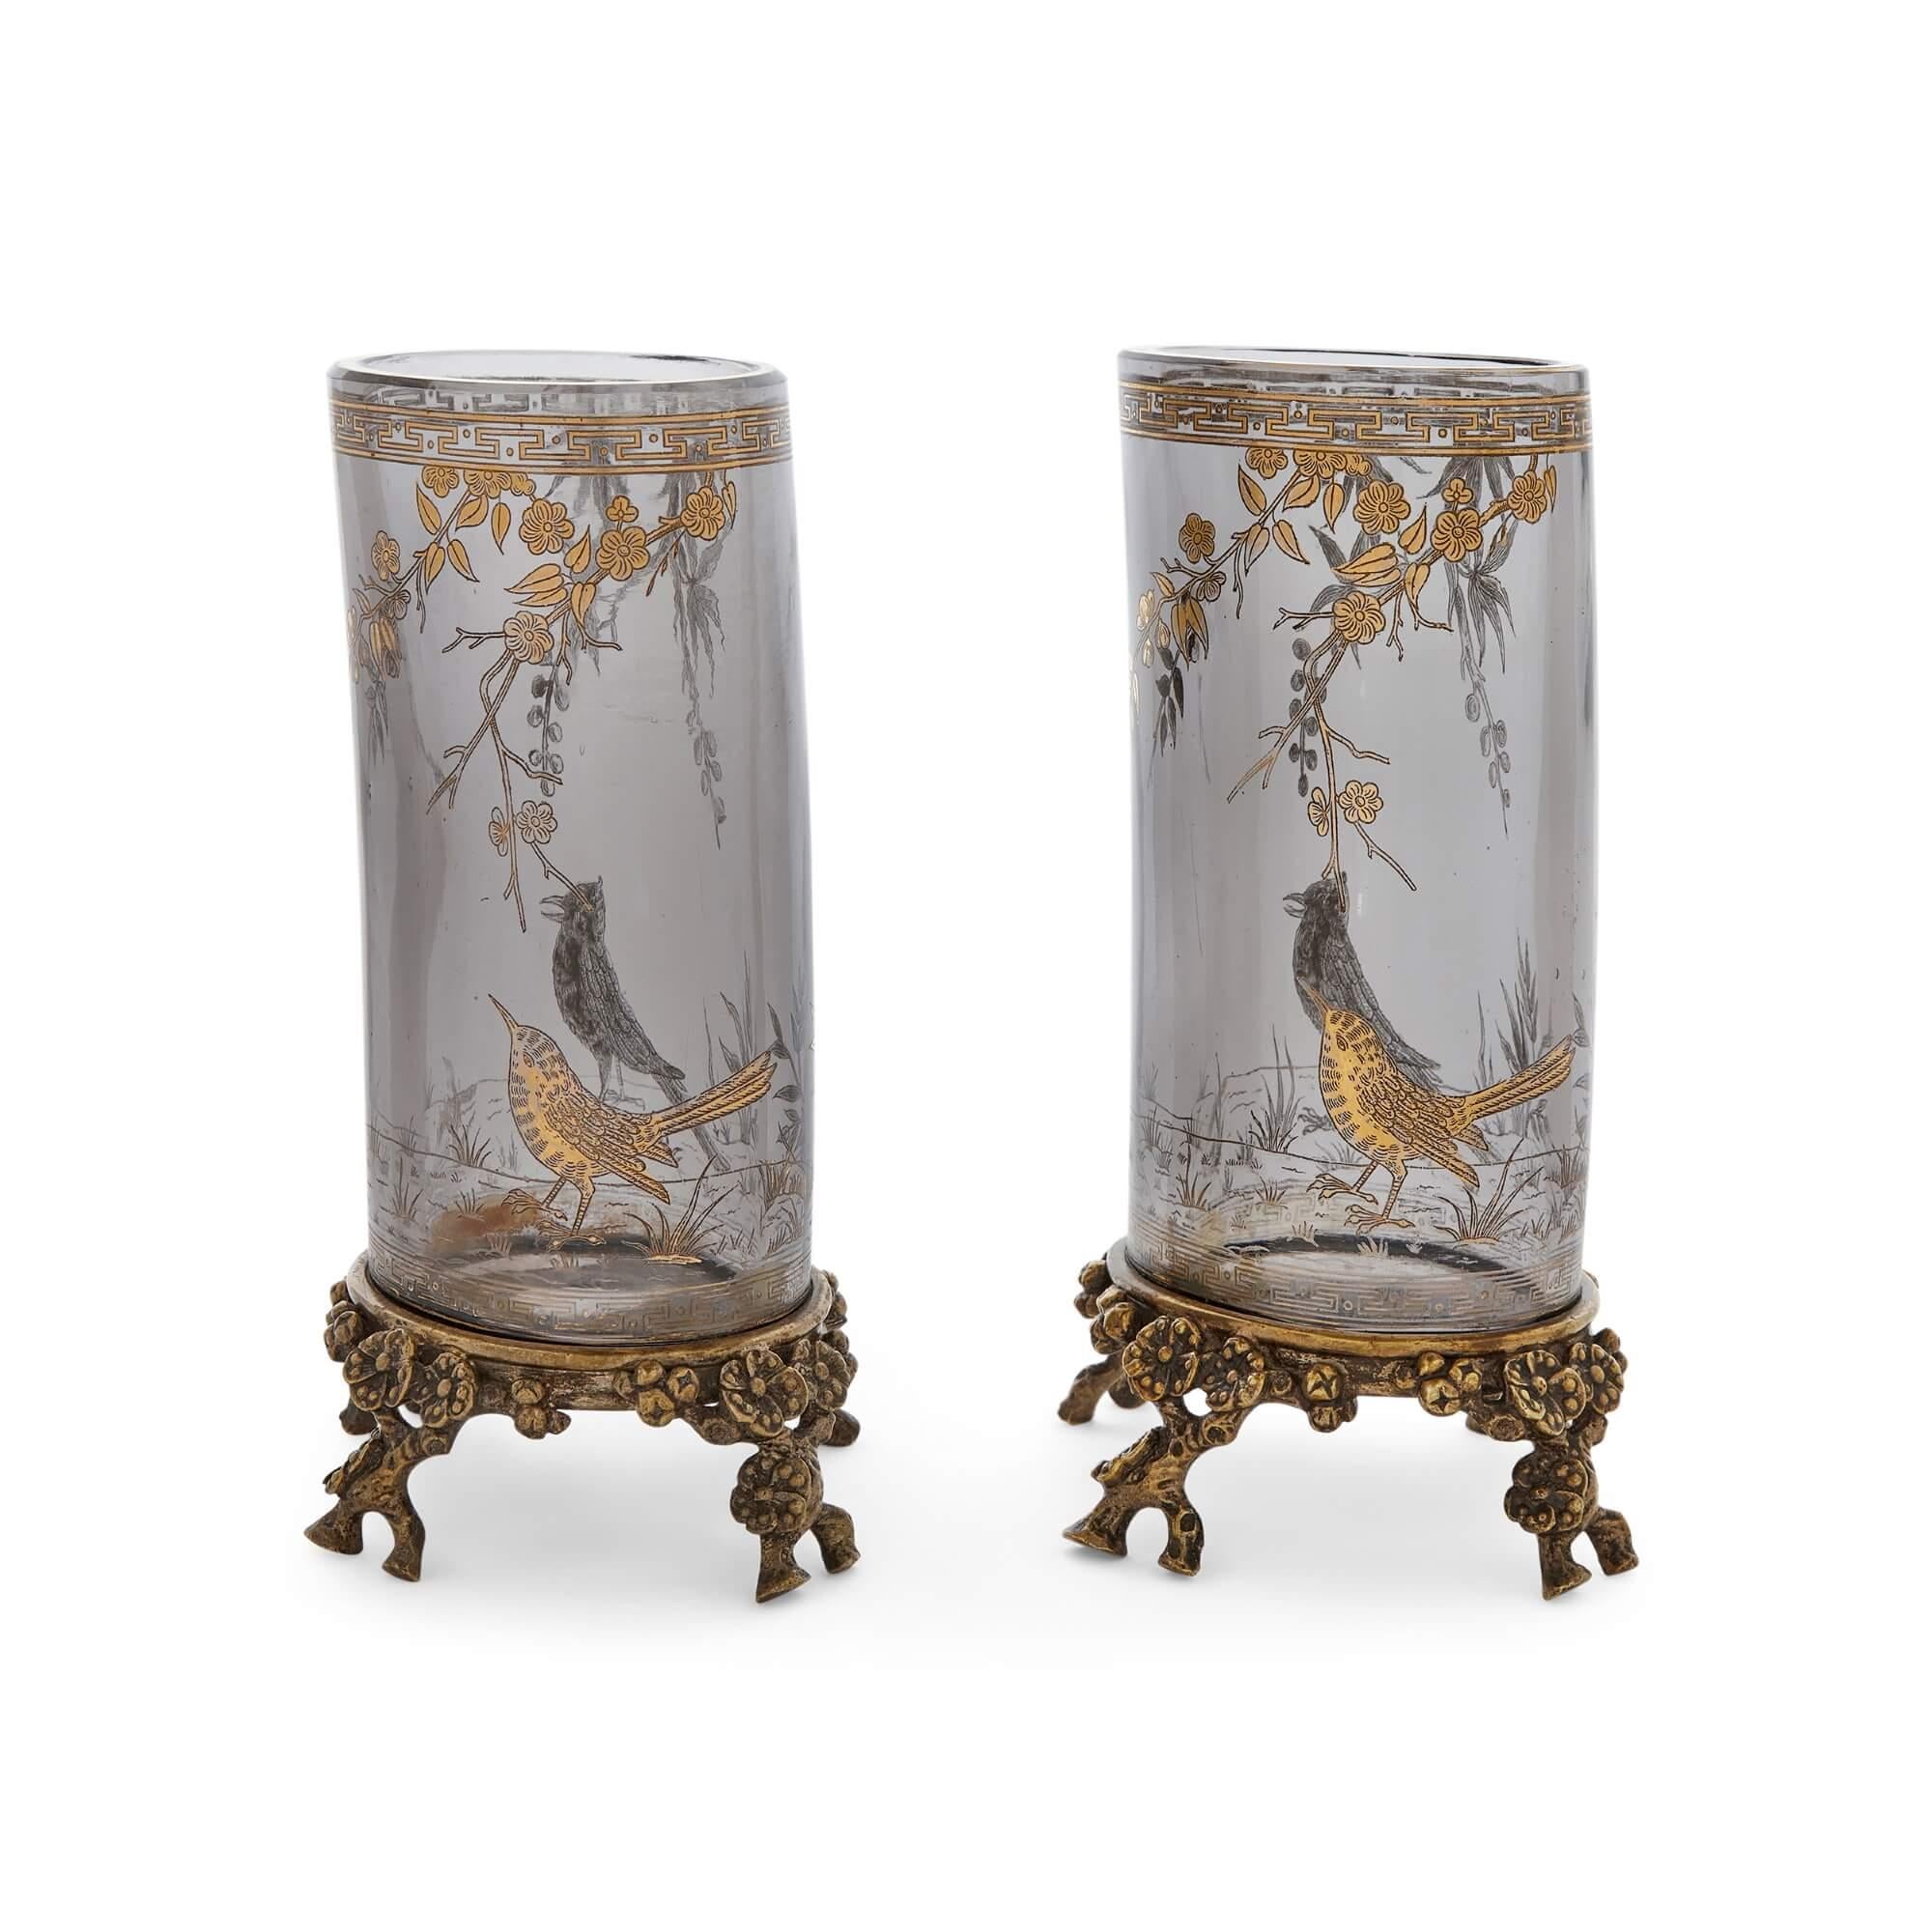 Japonisme Pair of Silvered and Gilt-Bronze Mounted Glass Vases by Baccarat